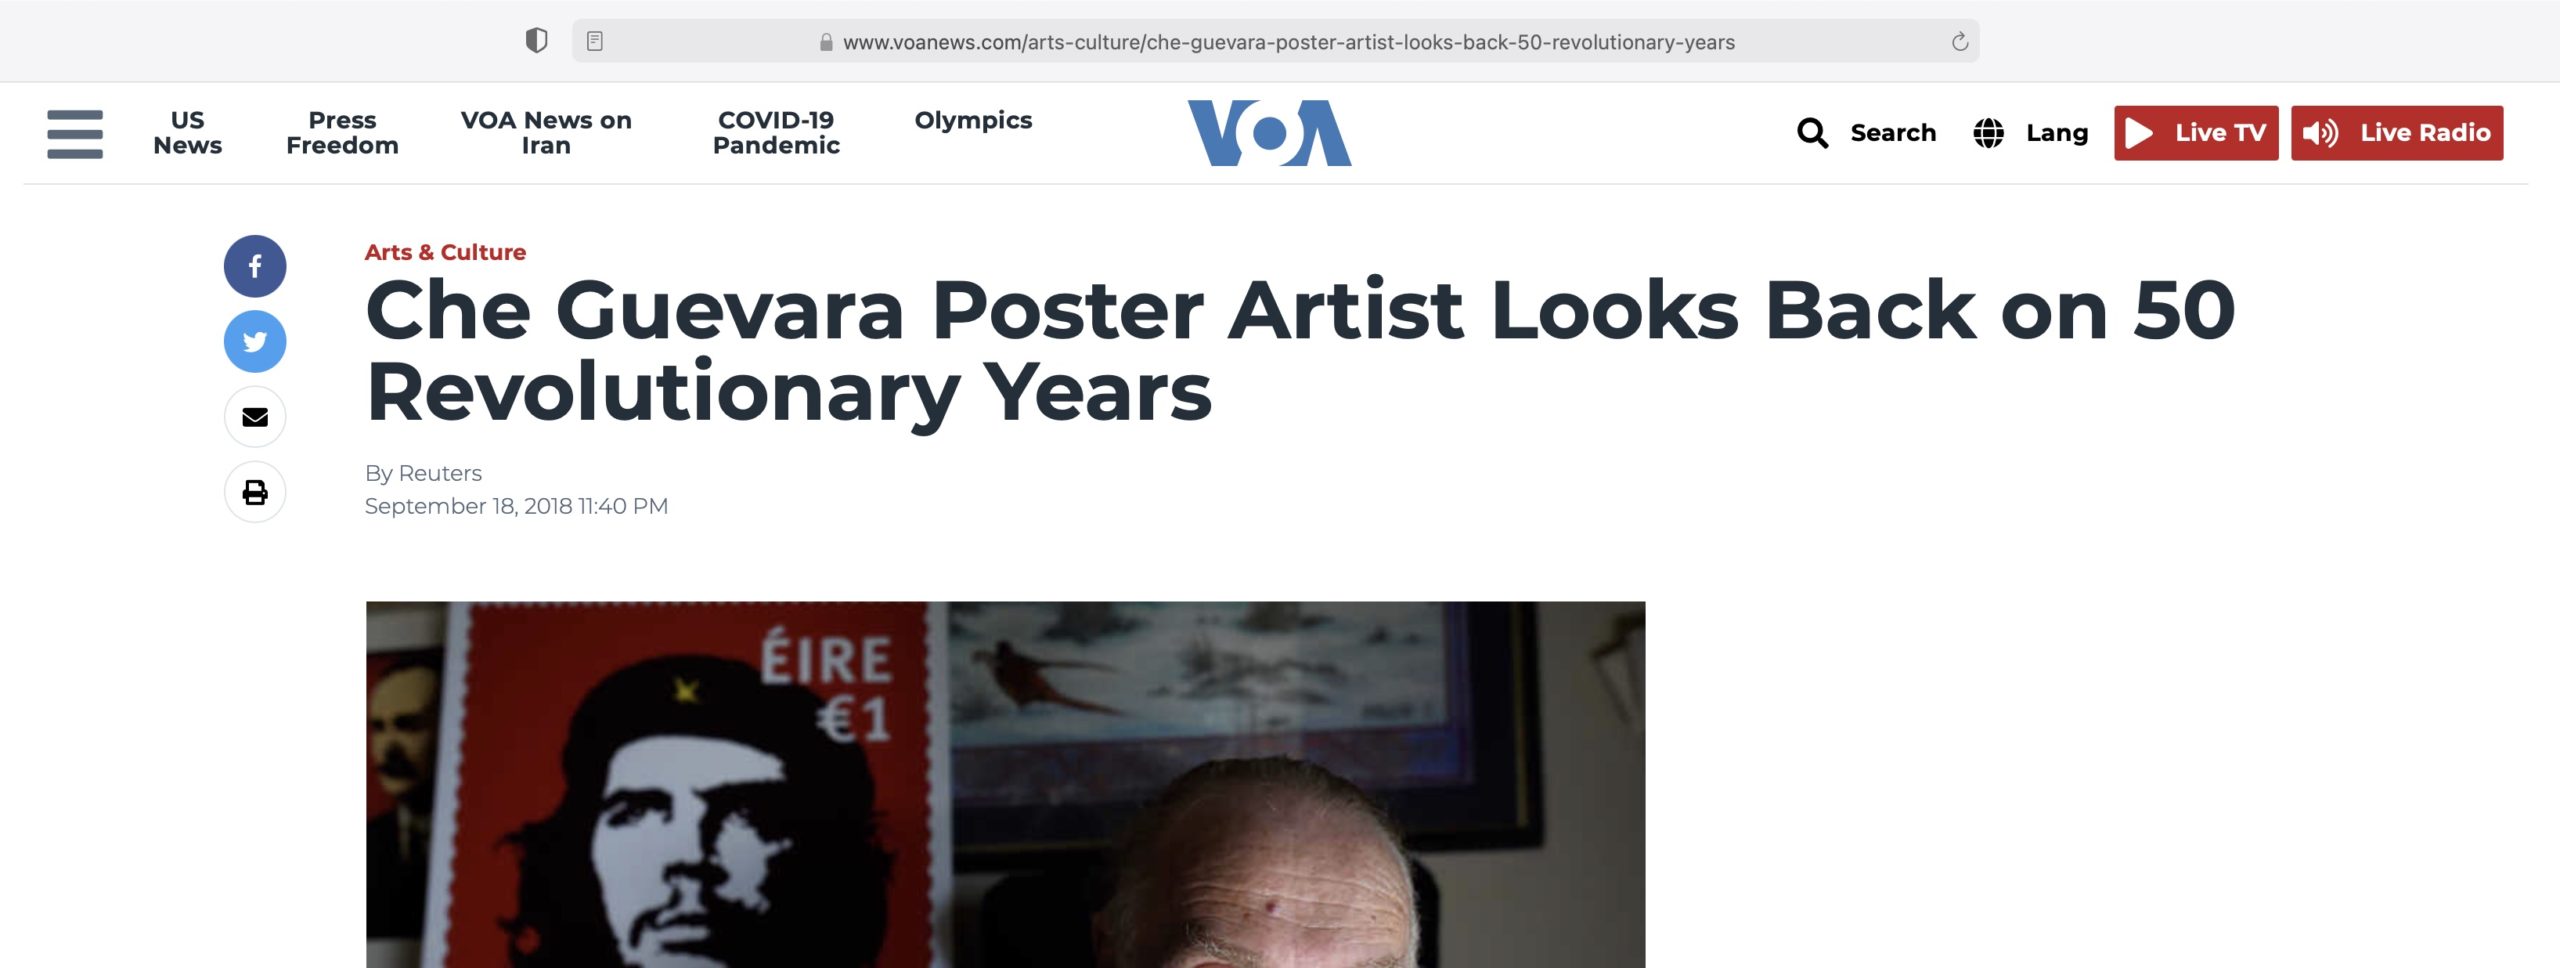 Voice of America VOA News Website report September 18, 2018 "Che Guevara Poster Artist Looks Back on 50 Revolutionary Years" by Reuters originally posted as a VOA News report Screen Shot 2021-07-29 at 6:01:36 PM.